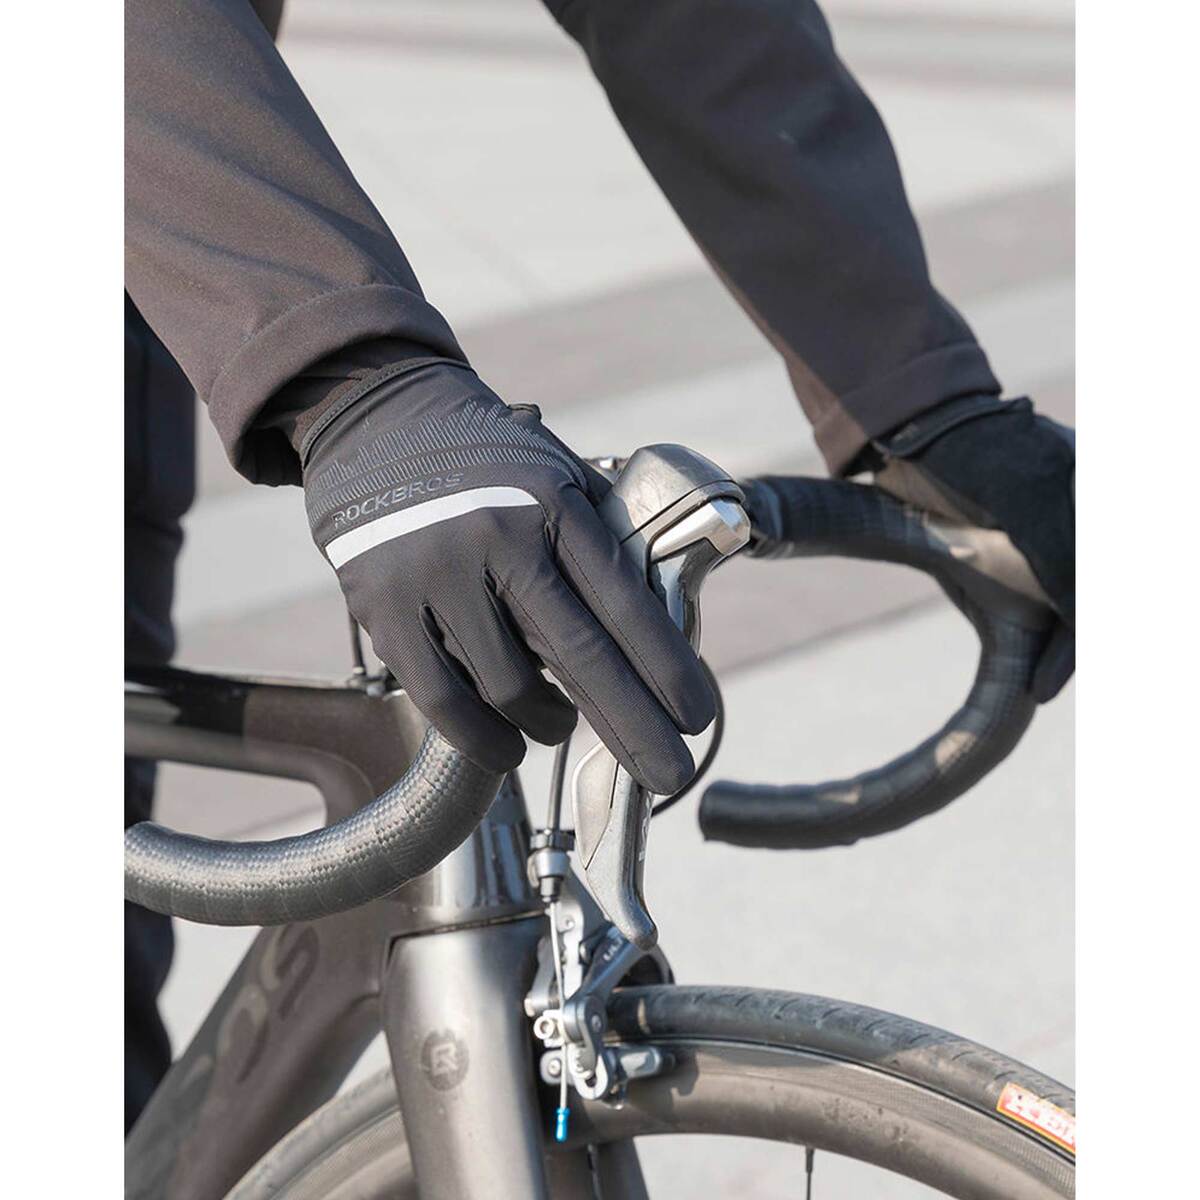 ROCKBROS Touch Screen Cycling Gloves S247-1 Large